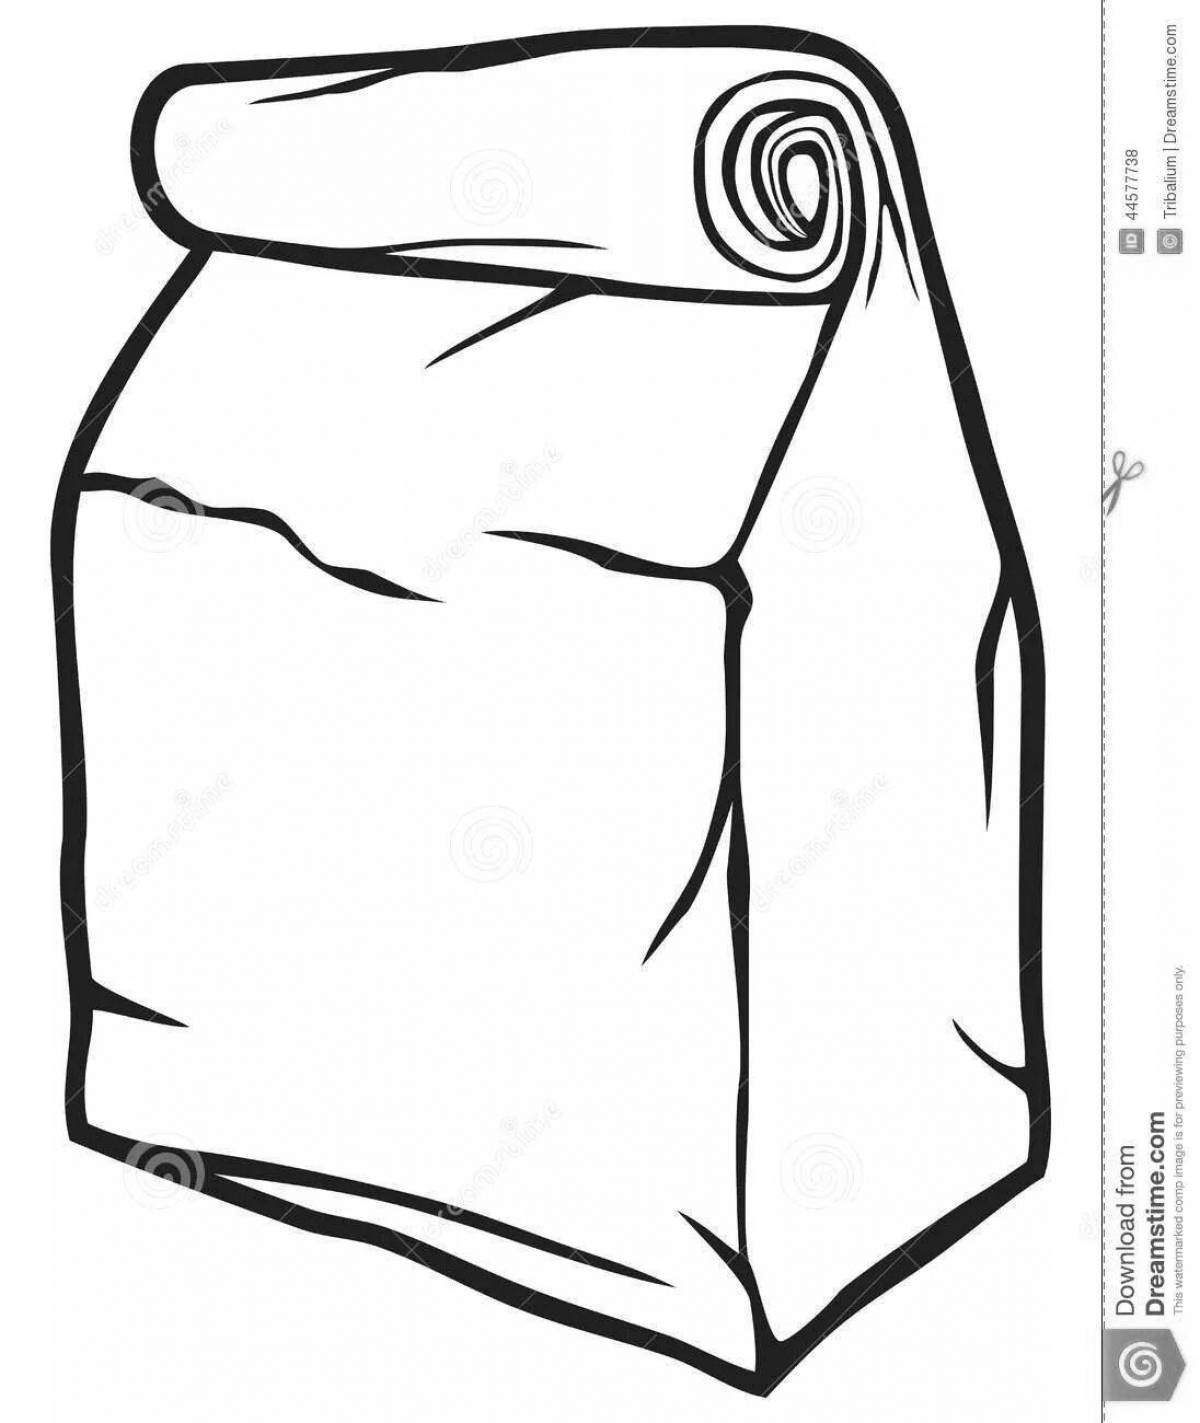 Charming sachet coloring page